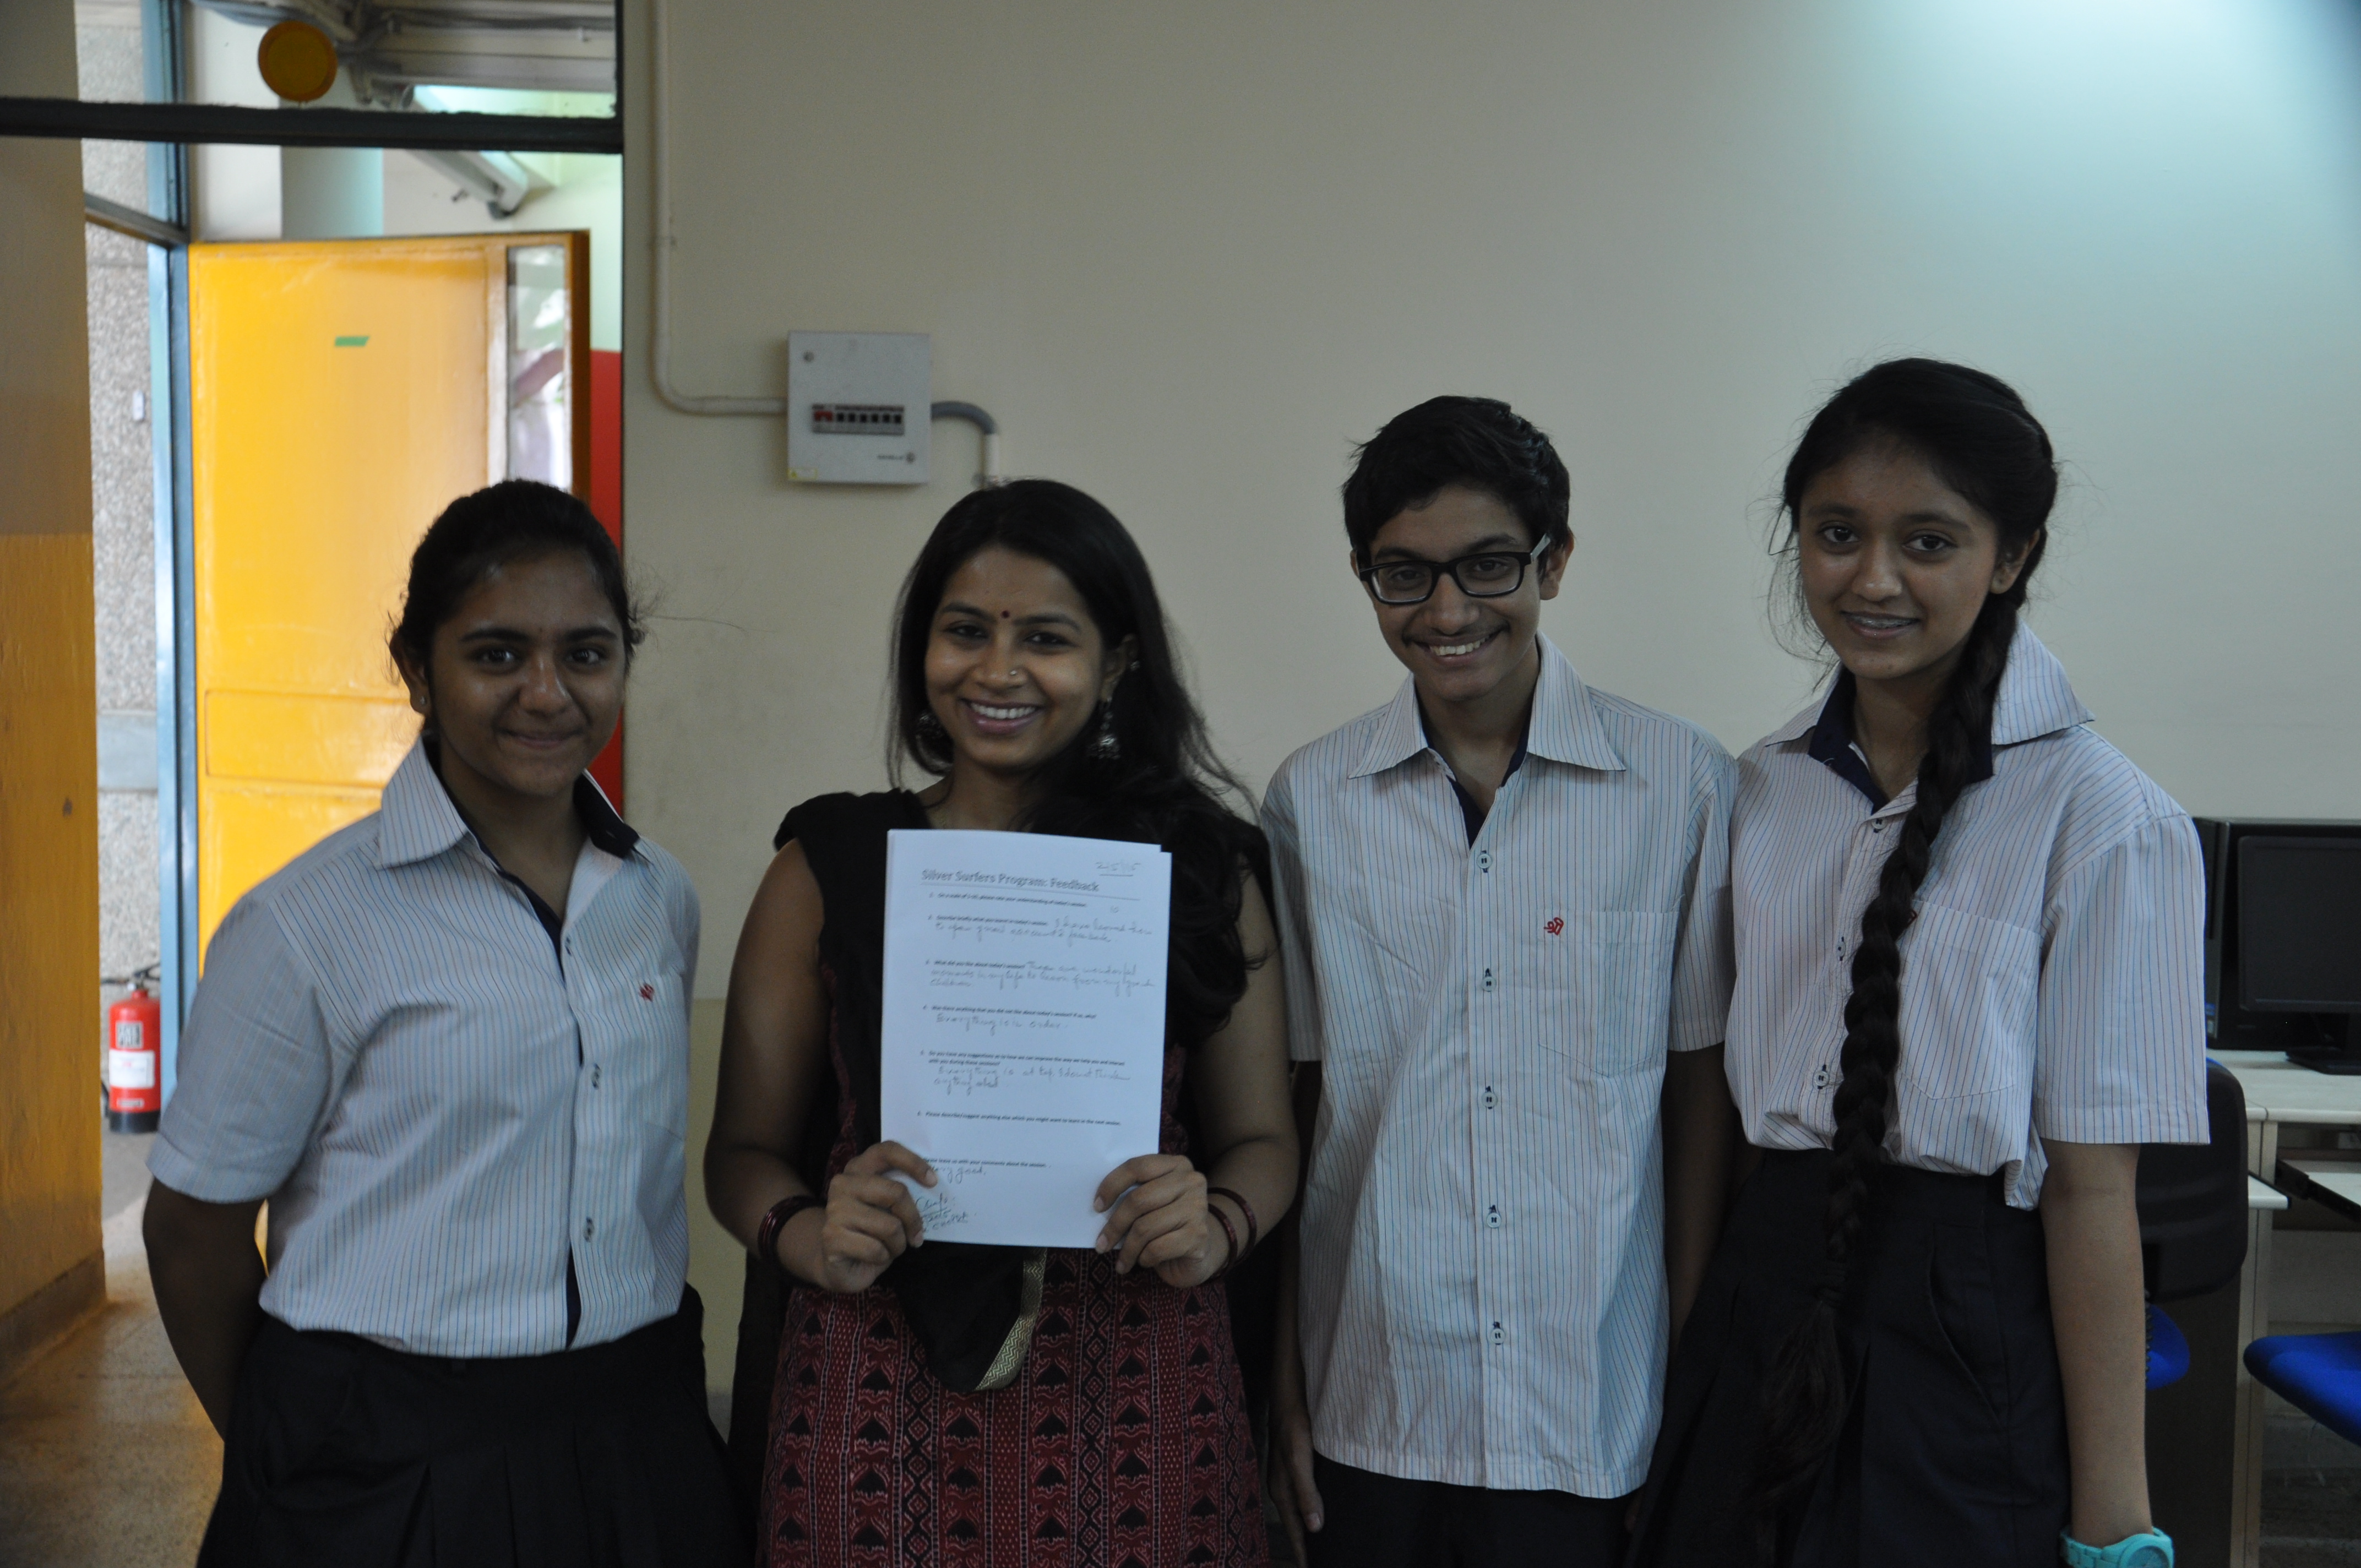 Suyesha (on extreme left) and Vibhor (second from right) with their teacher